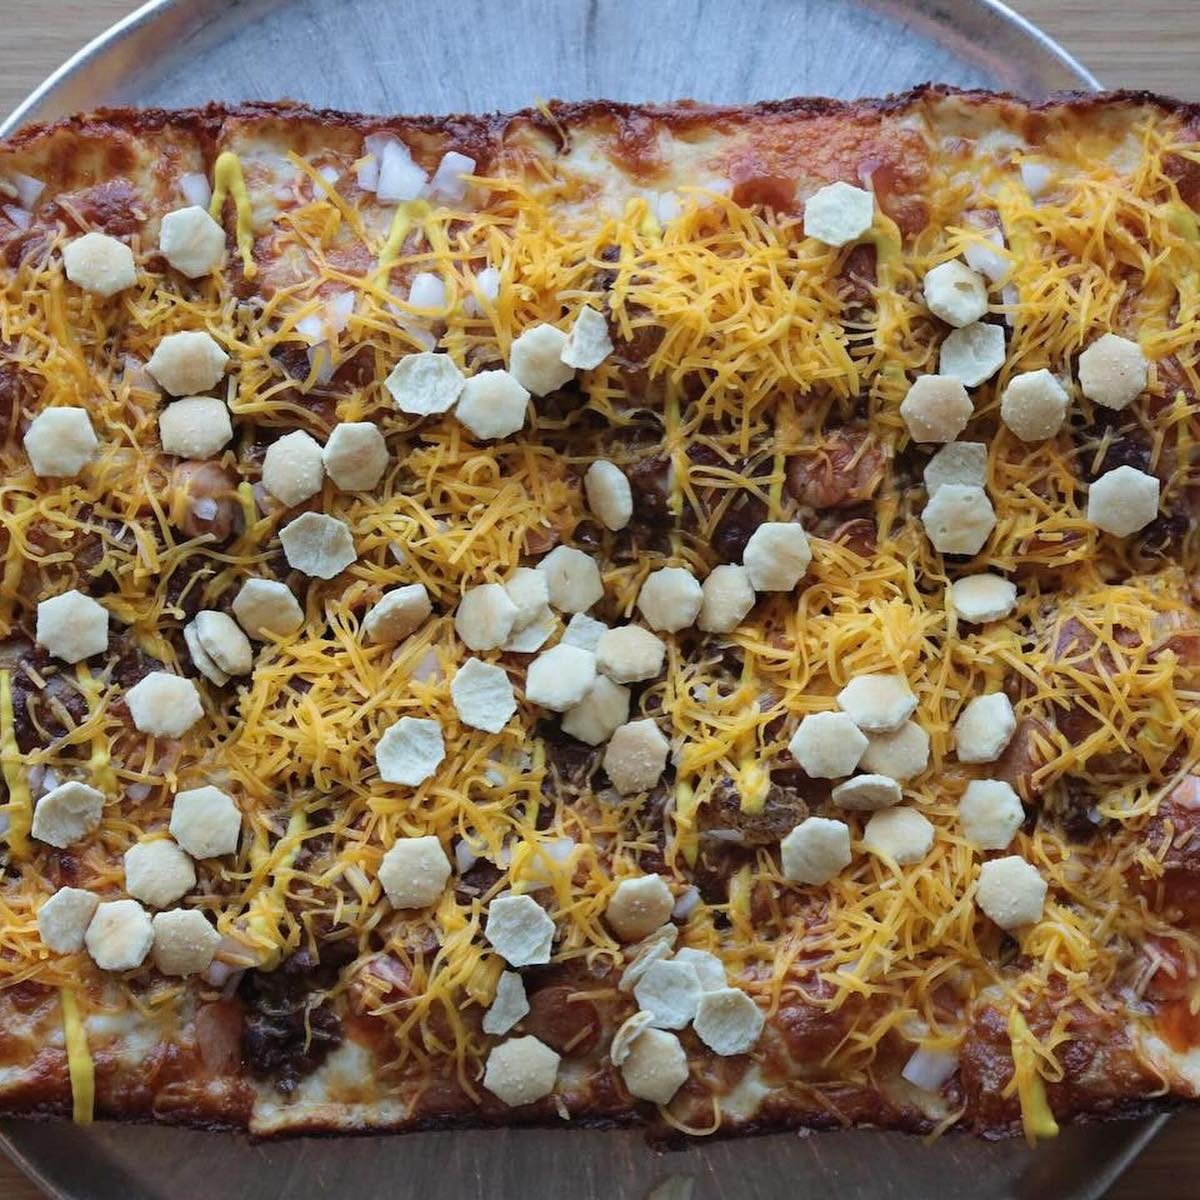 This Taglio-Camp Washington Chili Pizza is the Hero We All Need Right Now